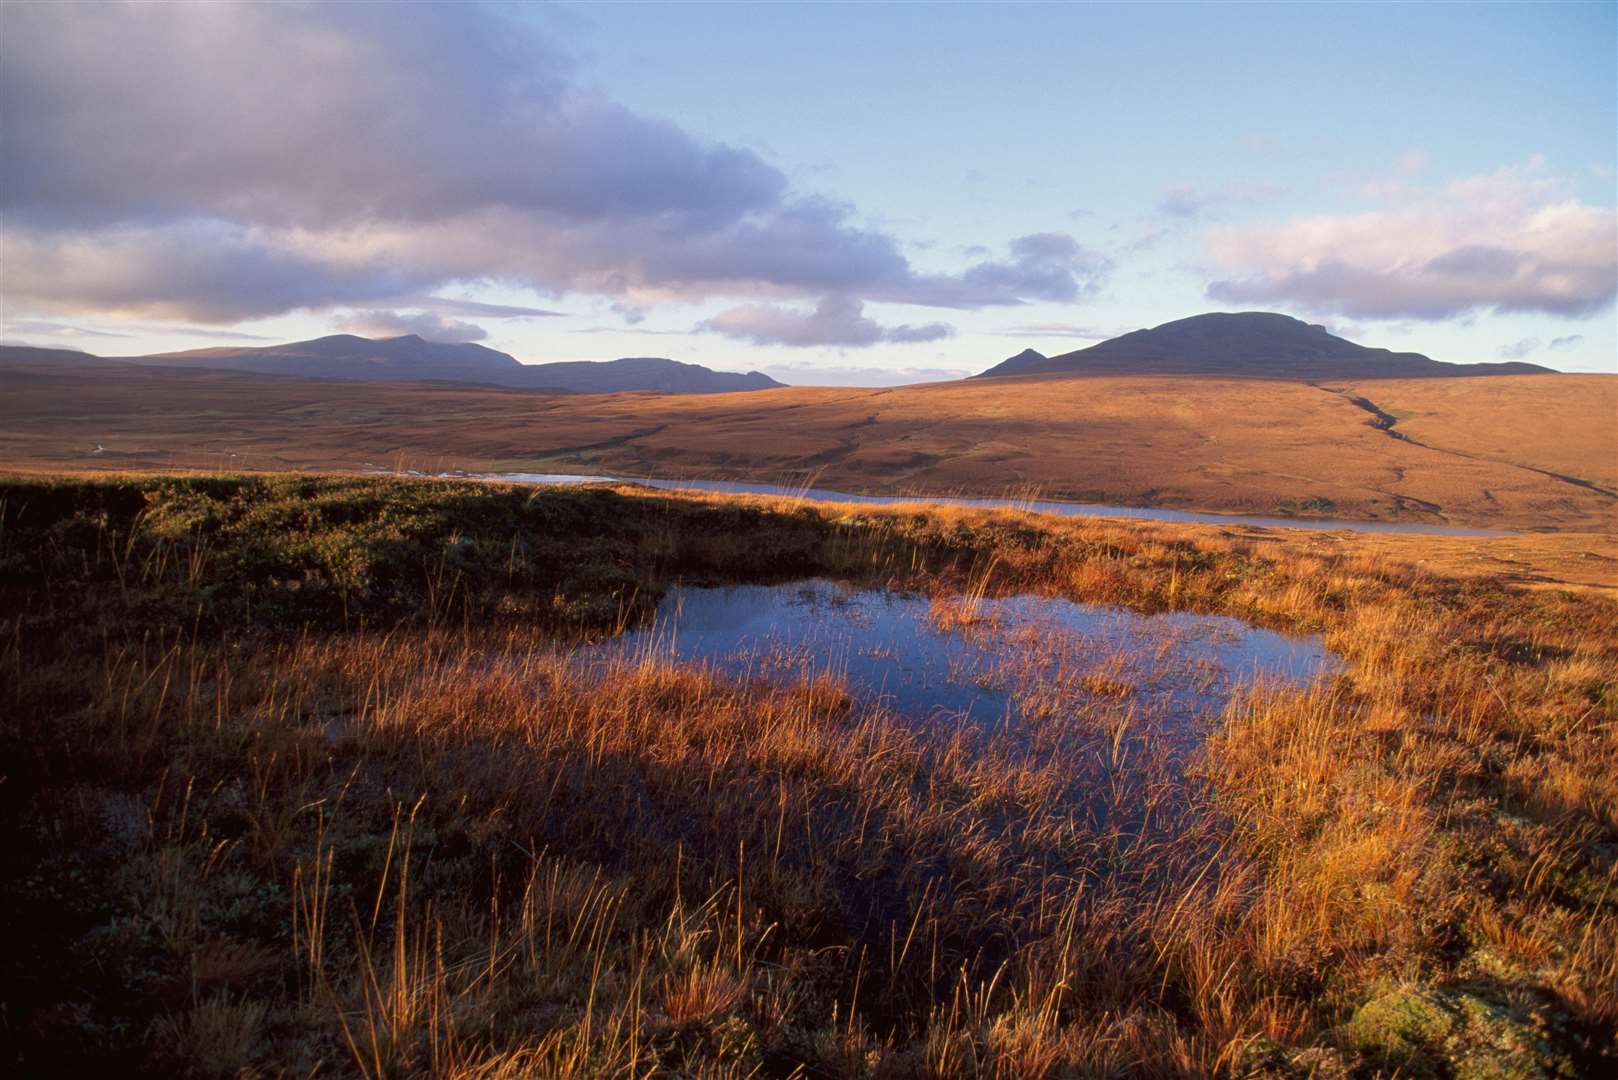 The Flow Country which is on the UK's tentative list for World Heritage Site status.